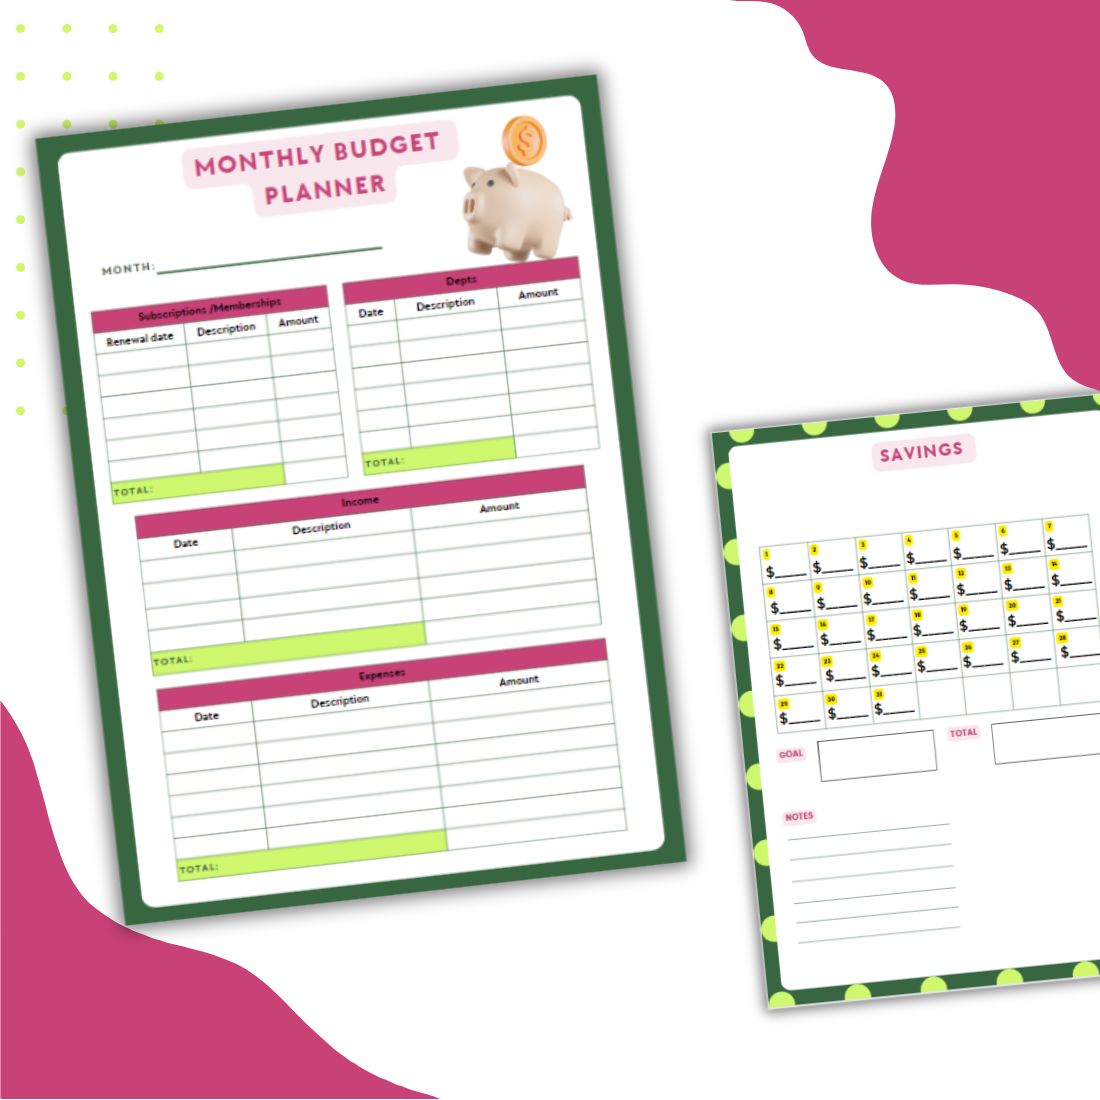 Monthly Budget Planner and Savings Tracker preview image.